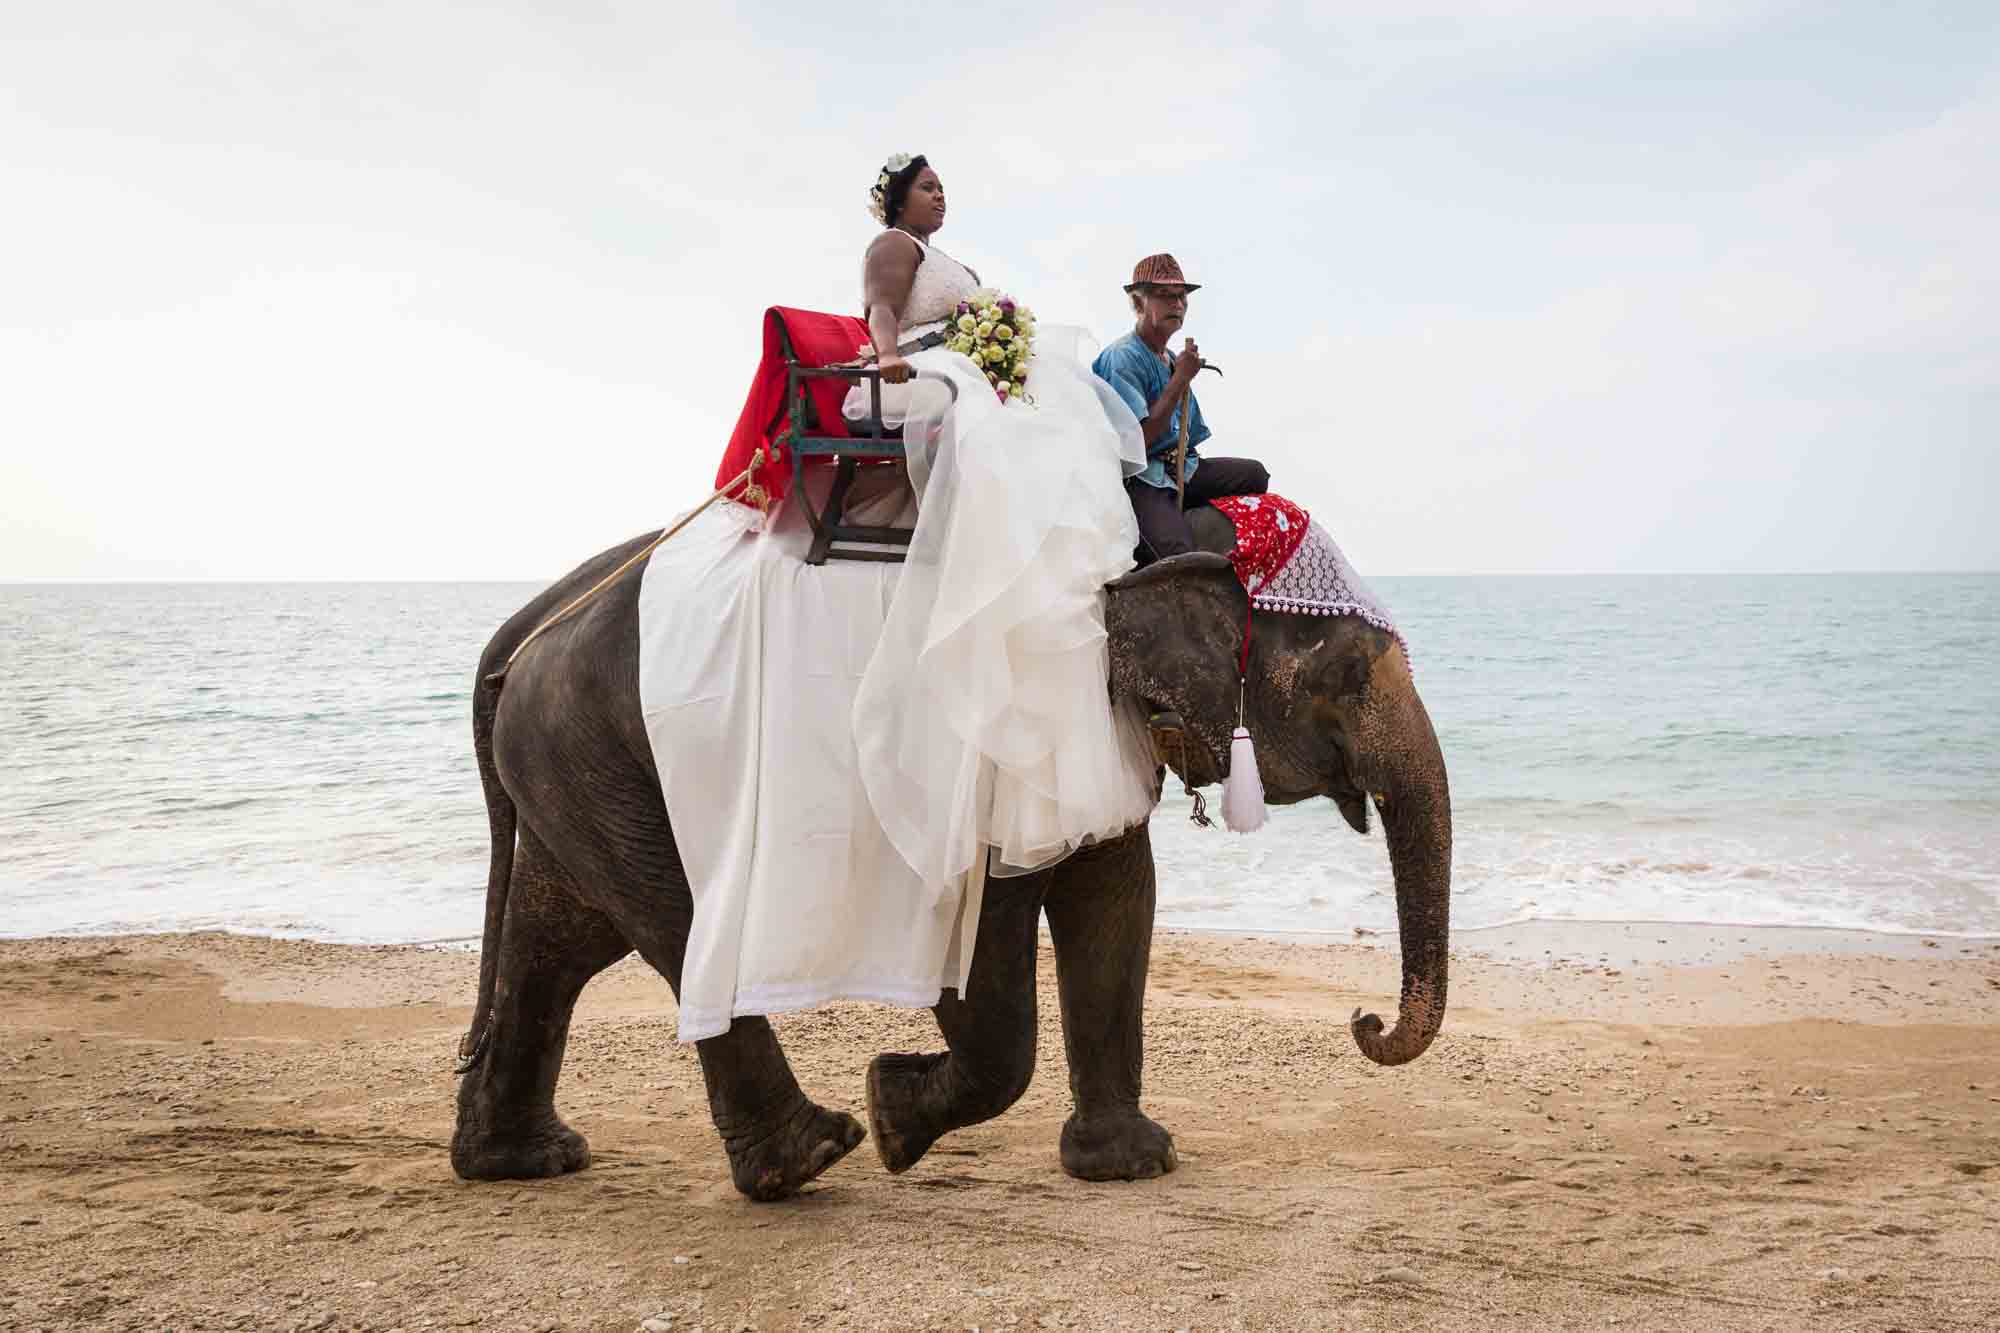 Bride on elephant for an article on destination wedding photography tips